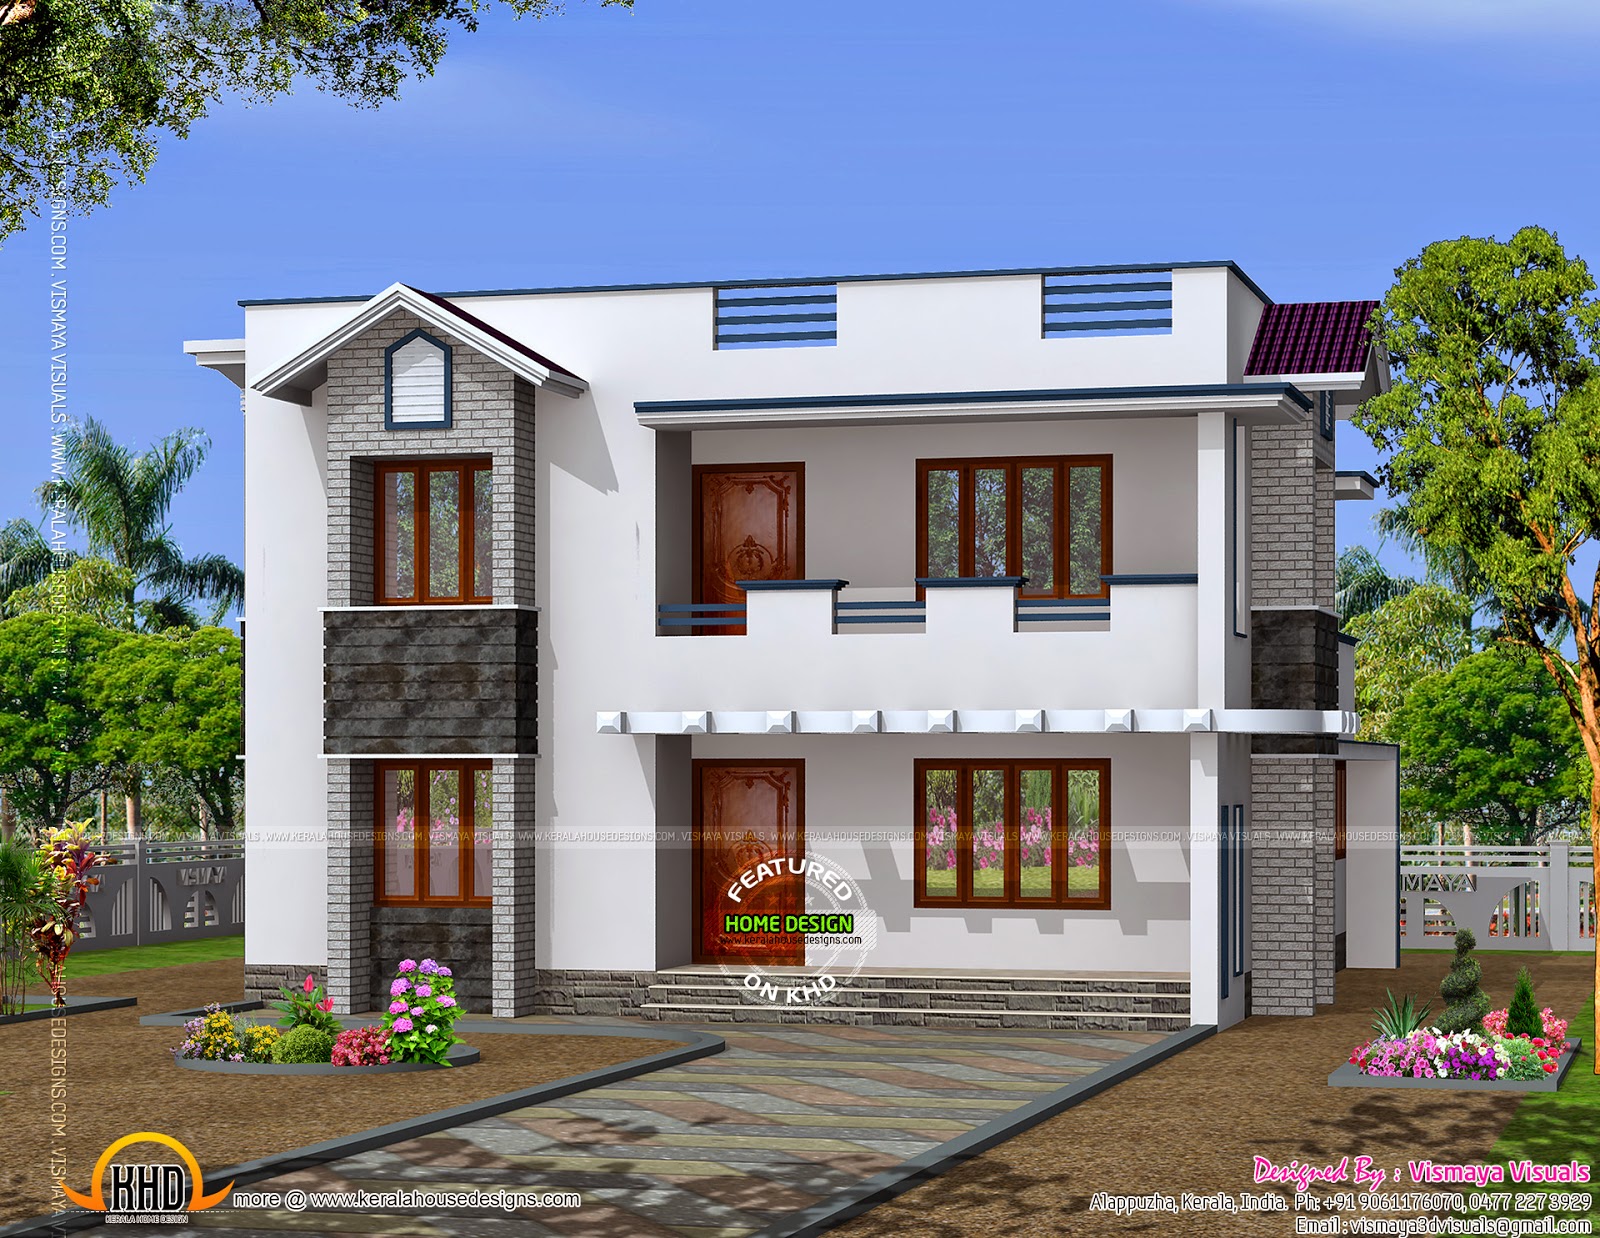  Simple  design home  Kerala home  design and floor plans 8000 houses